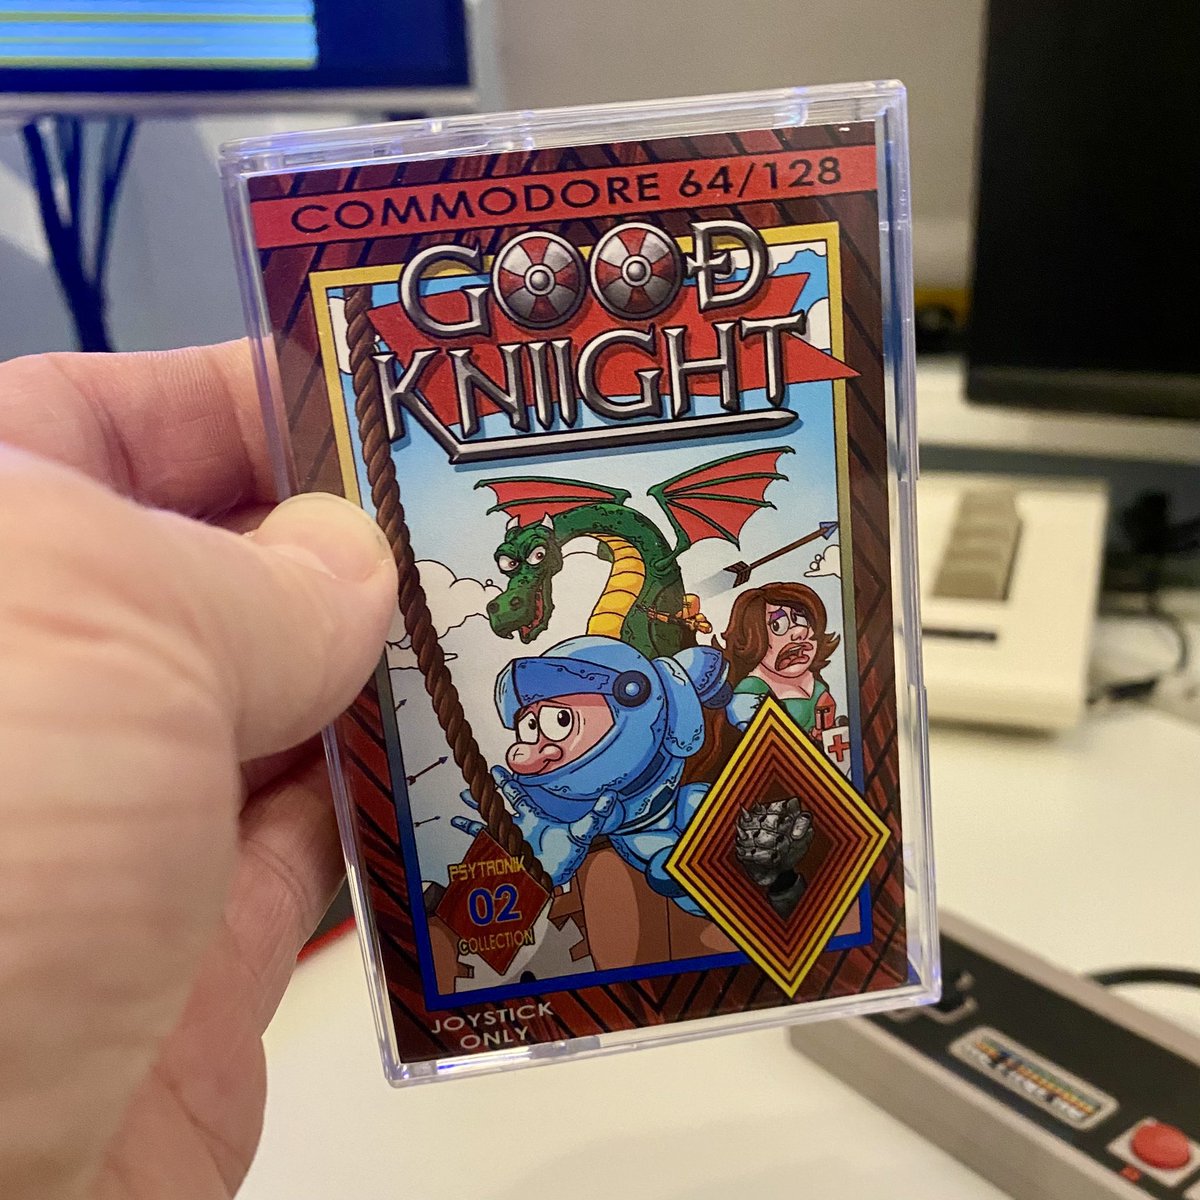 Another fun new arrival from Psytronik Software and this one is extremely challenging… #Commodore64 #C64 #Psytronik #Icon64 #ShareYourGames